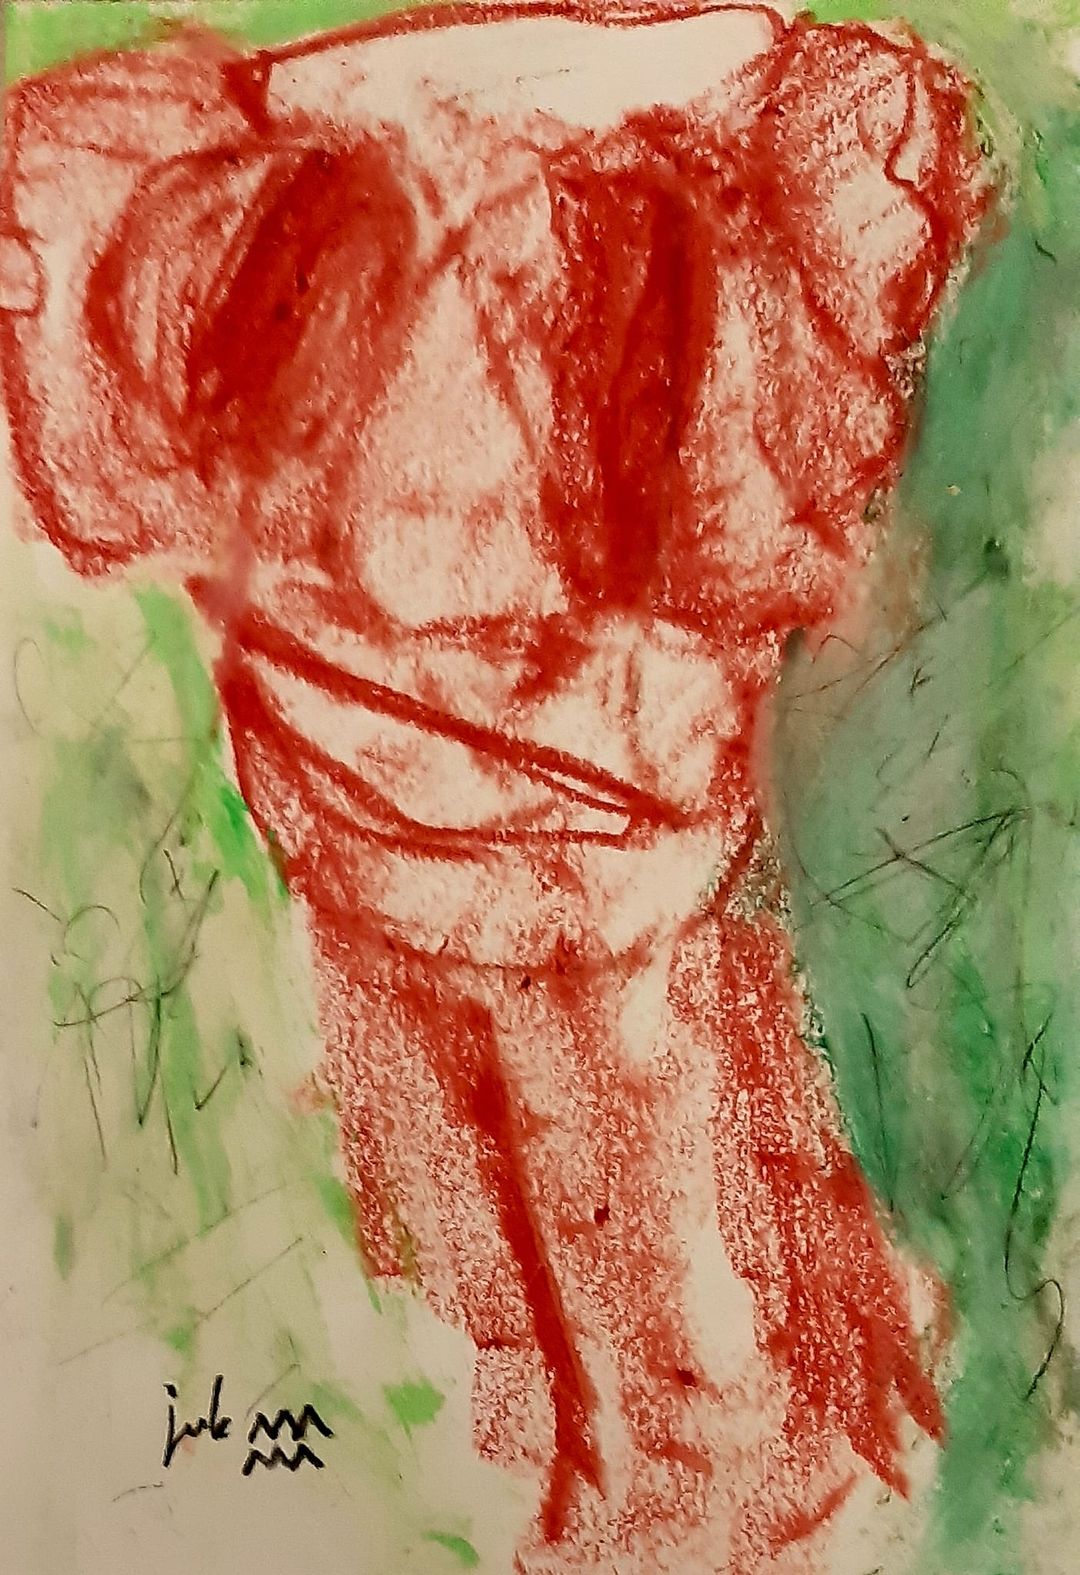 pastel drawing of a red figure in the shape of a head or fist on a green background